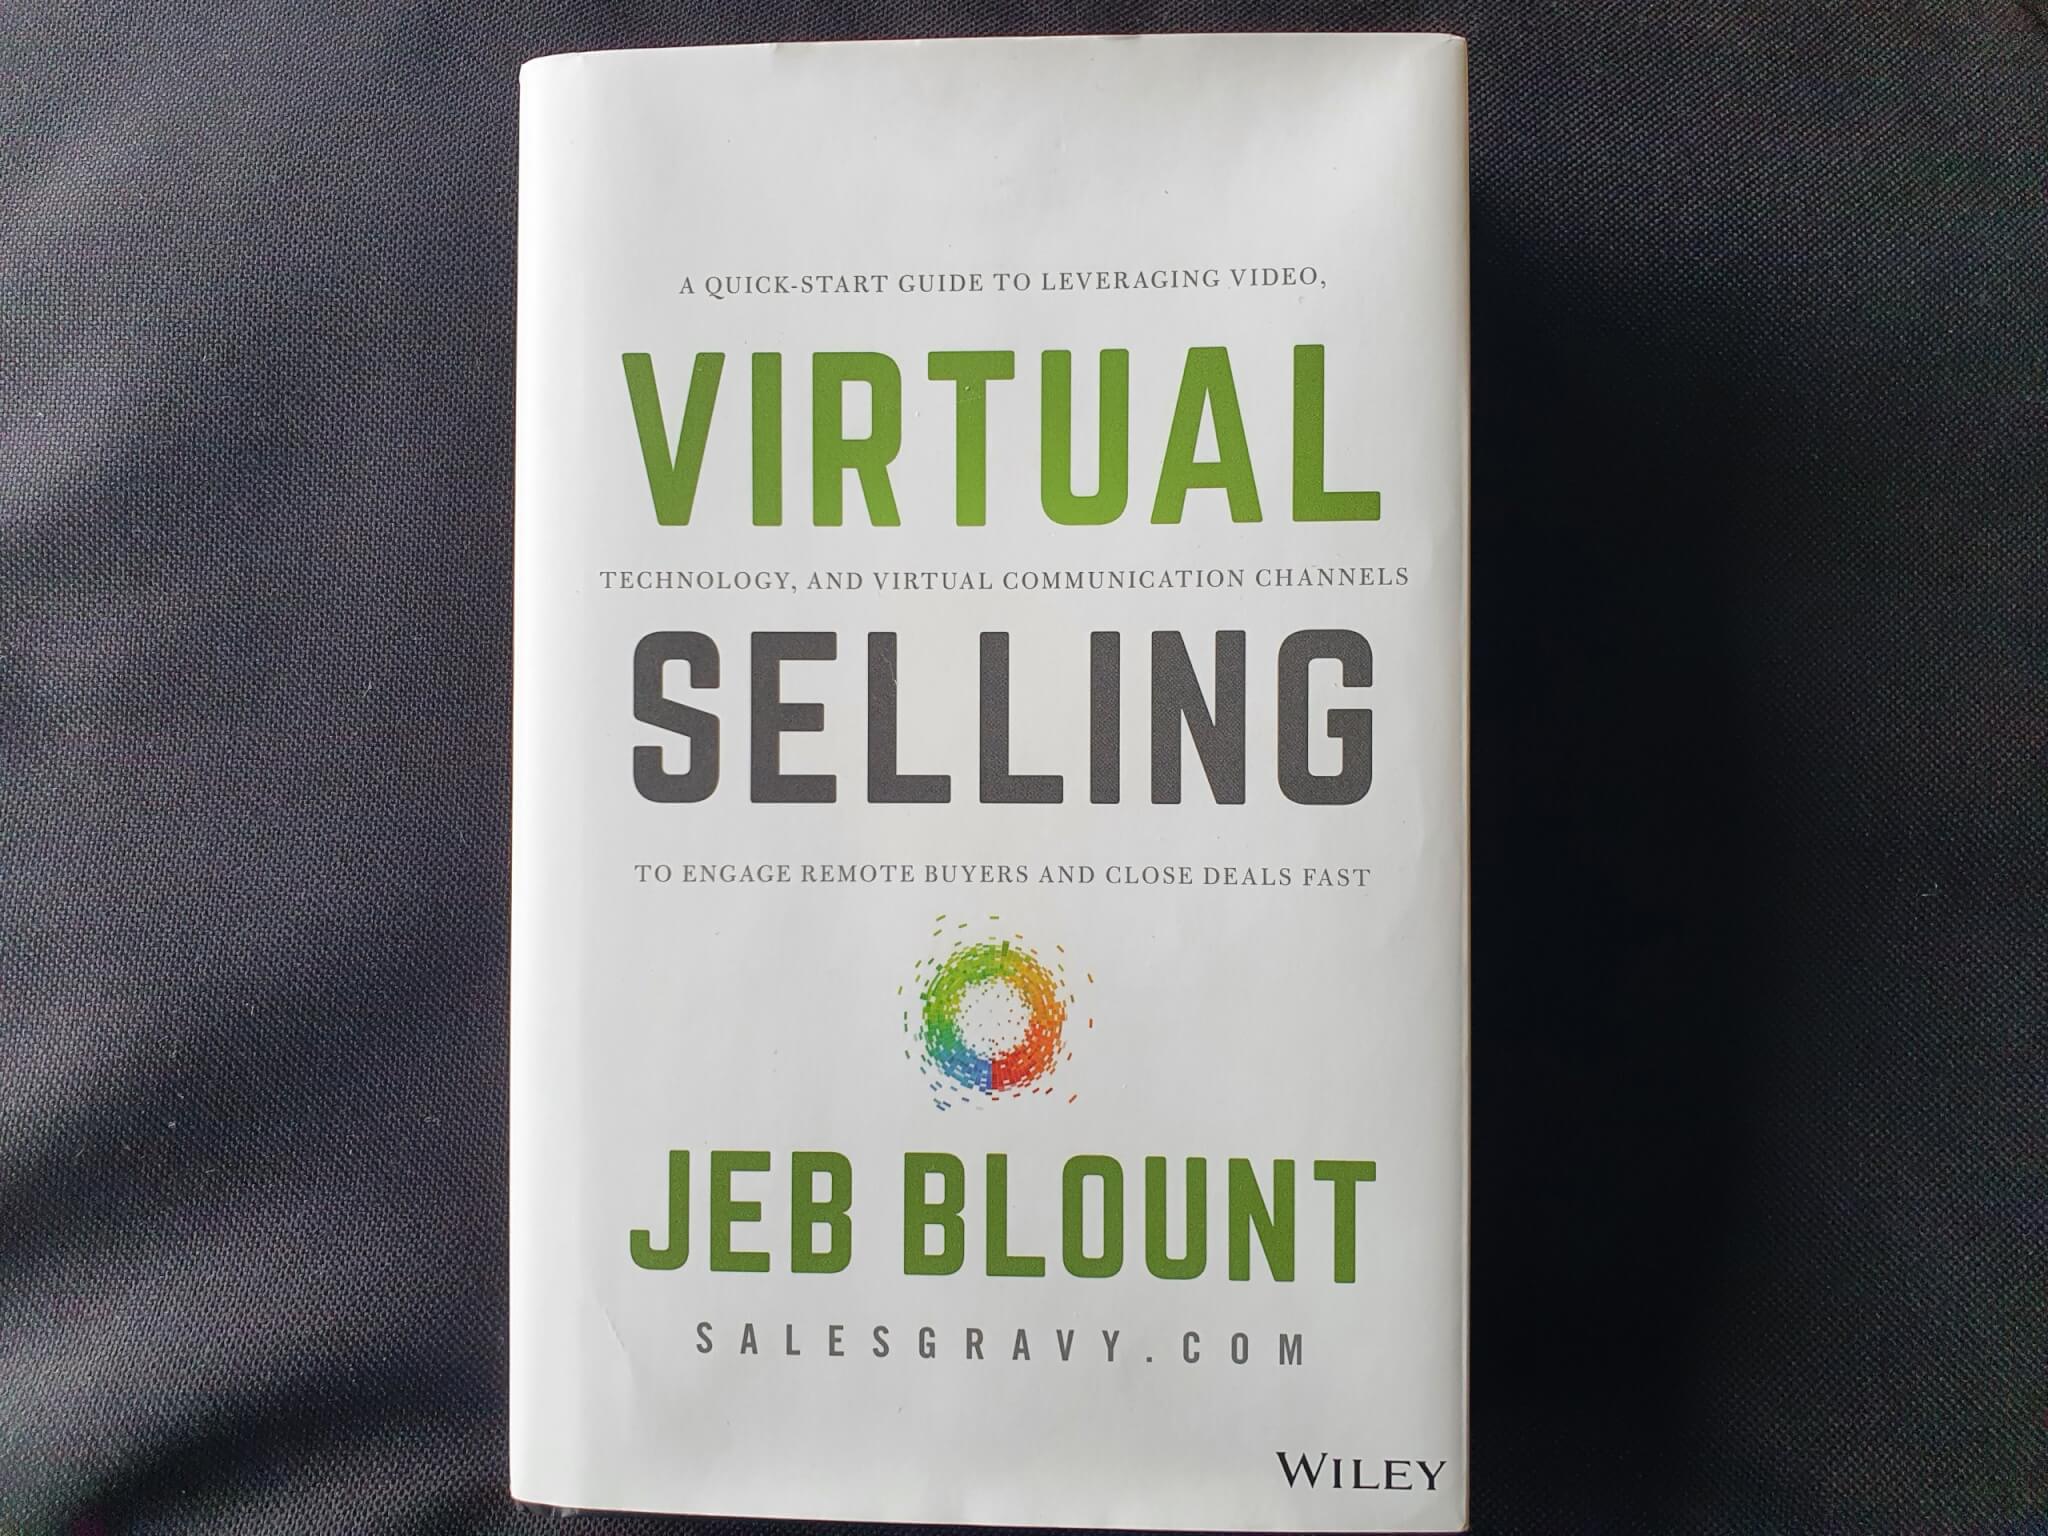 Magnify Consulting - Virtual Selling by Jeb Blount - Grow your sales in the post-Covid world